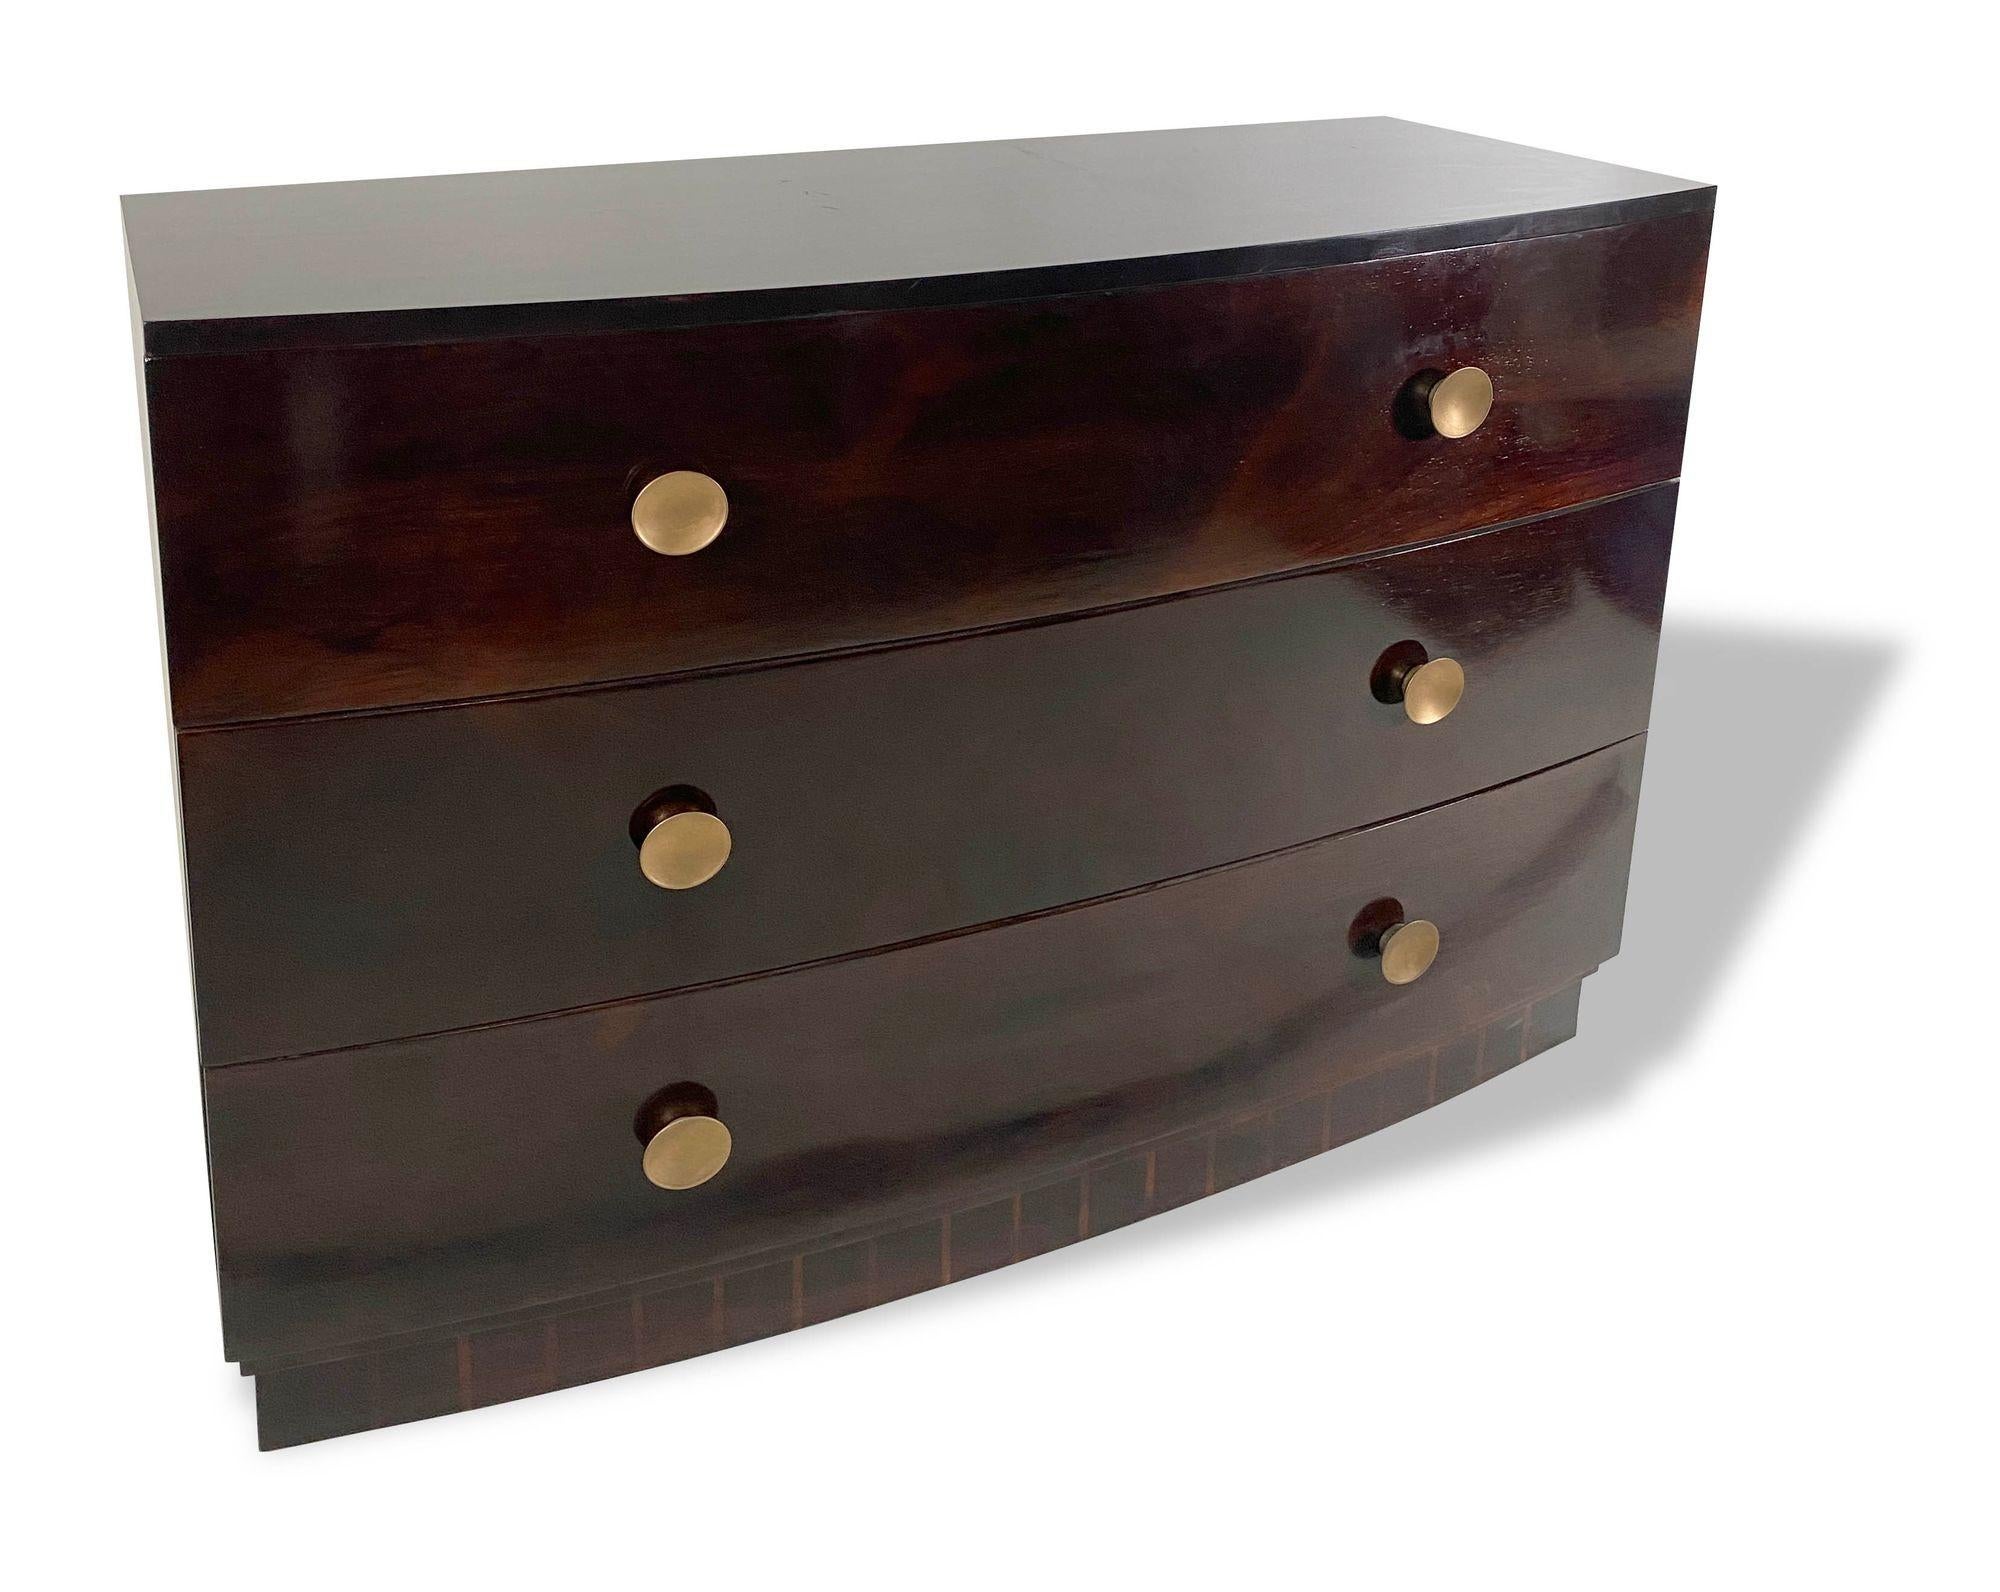 An exceptional pair of chests by Gilbert Rohde, in bookmatched rosewood with 